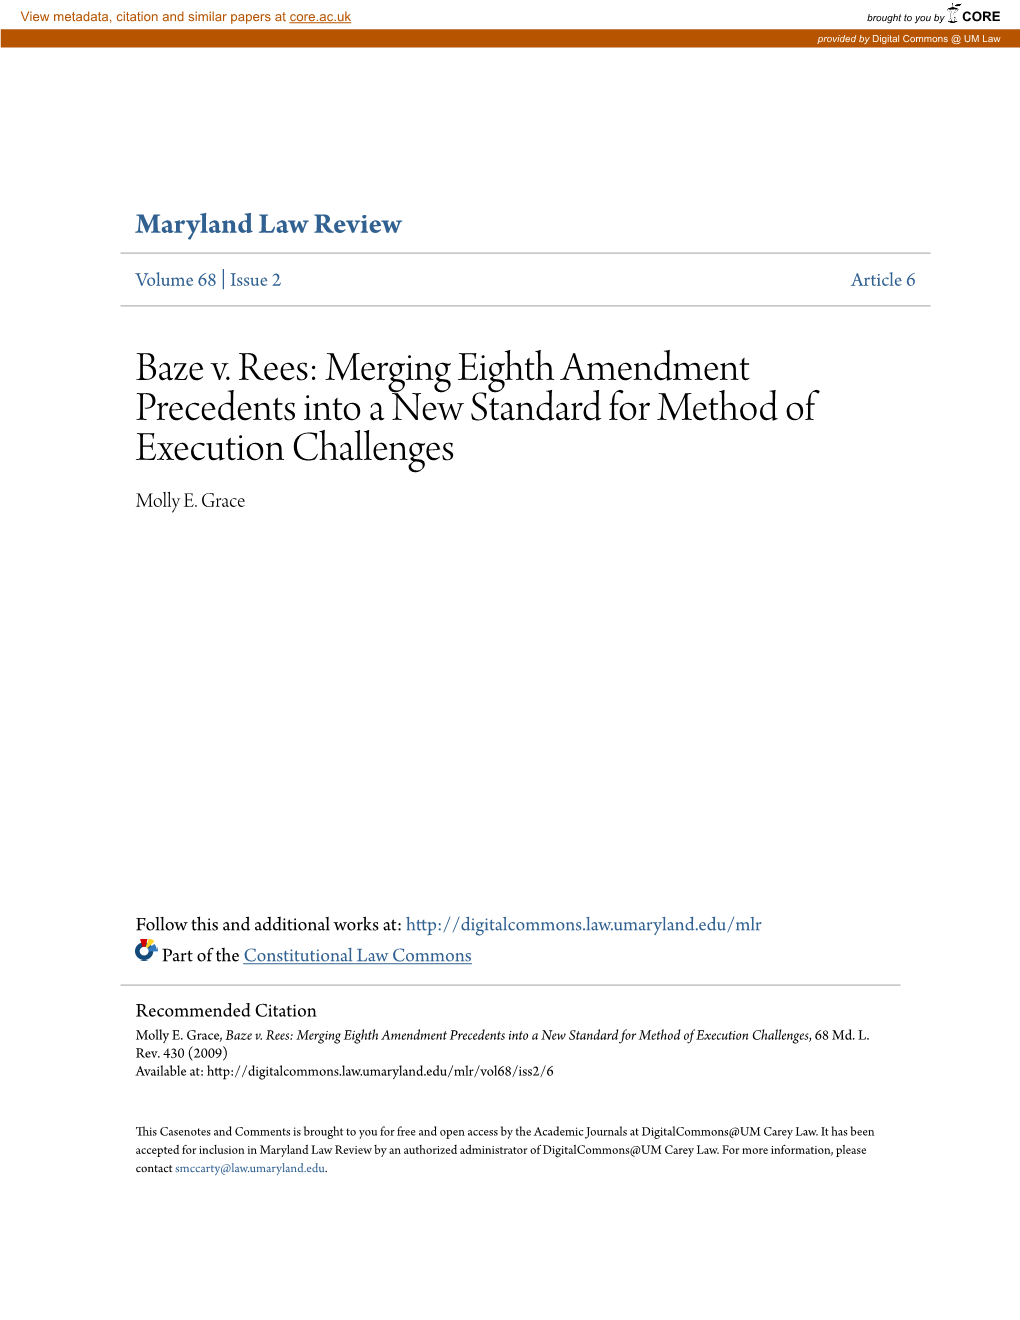 Baze V. Rees: Merging Eighth Amendment Precedents Into a New Standard for Method of Execution Challenges Molly E